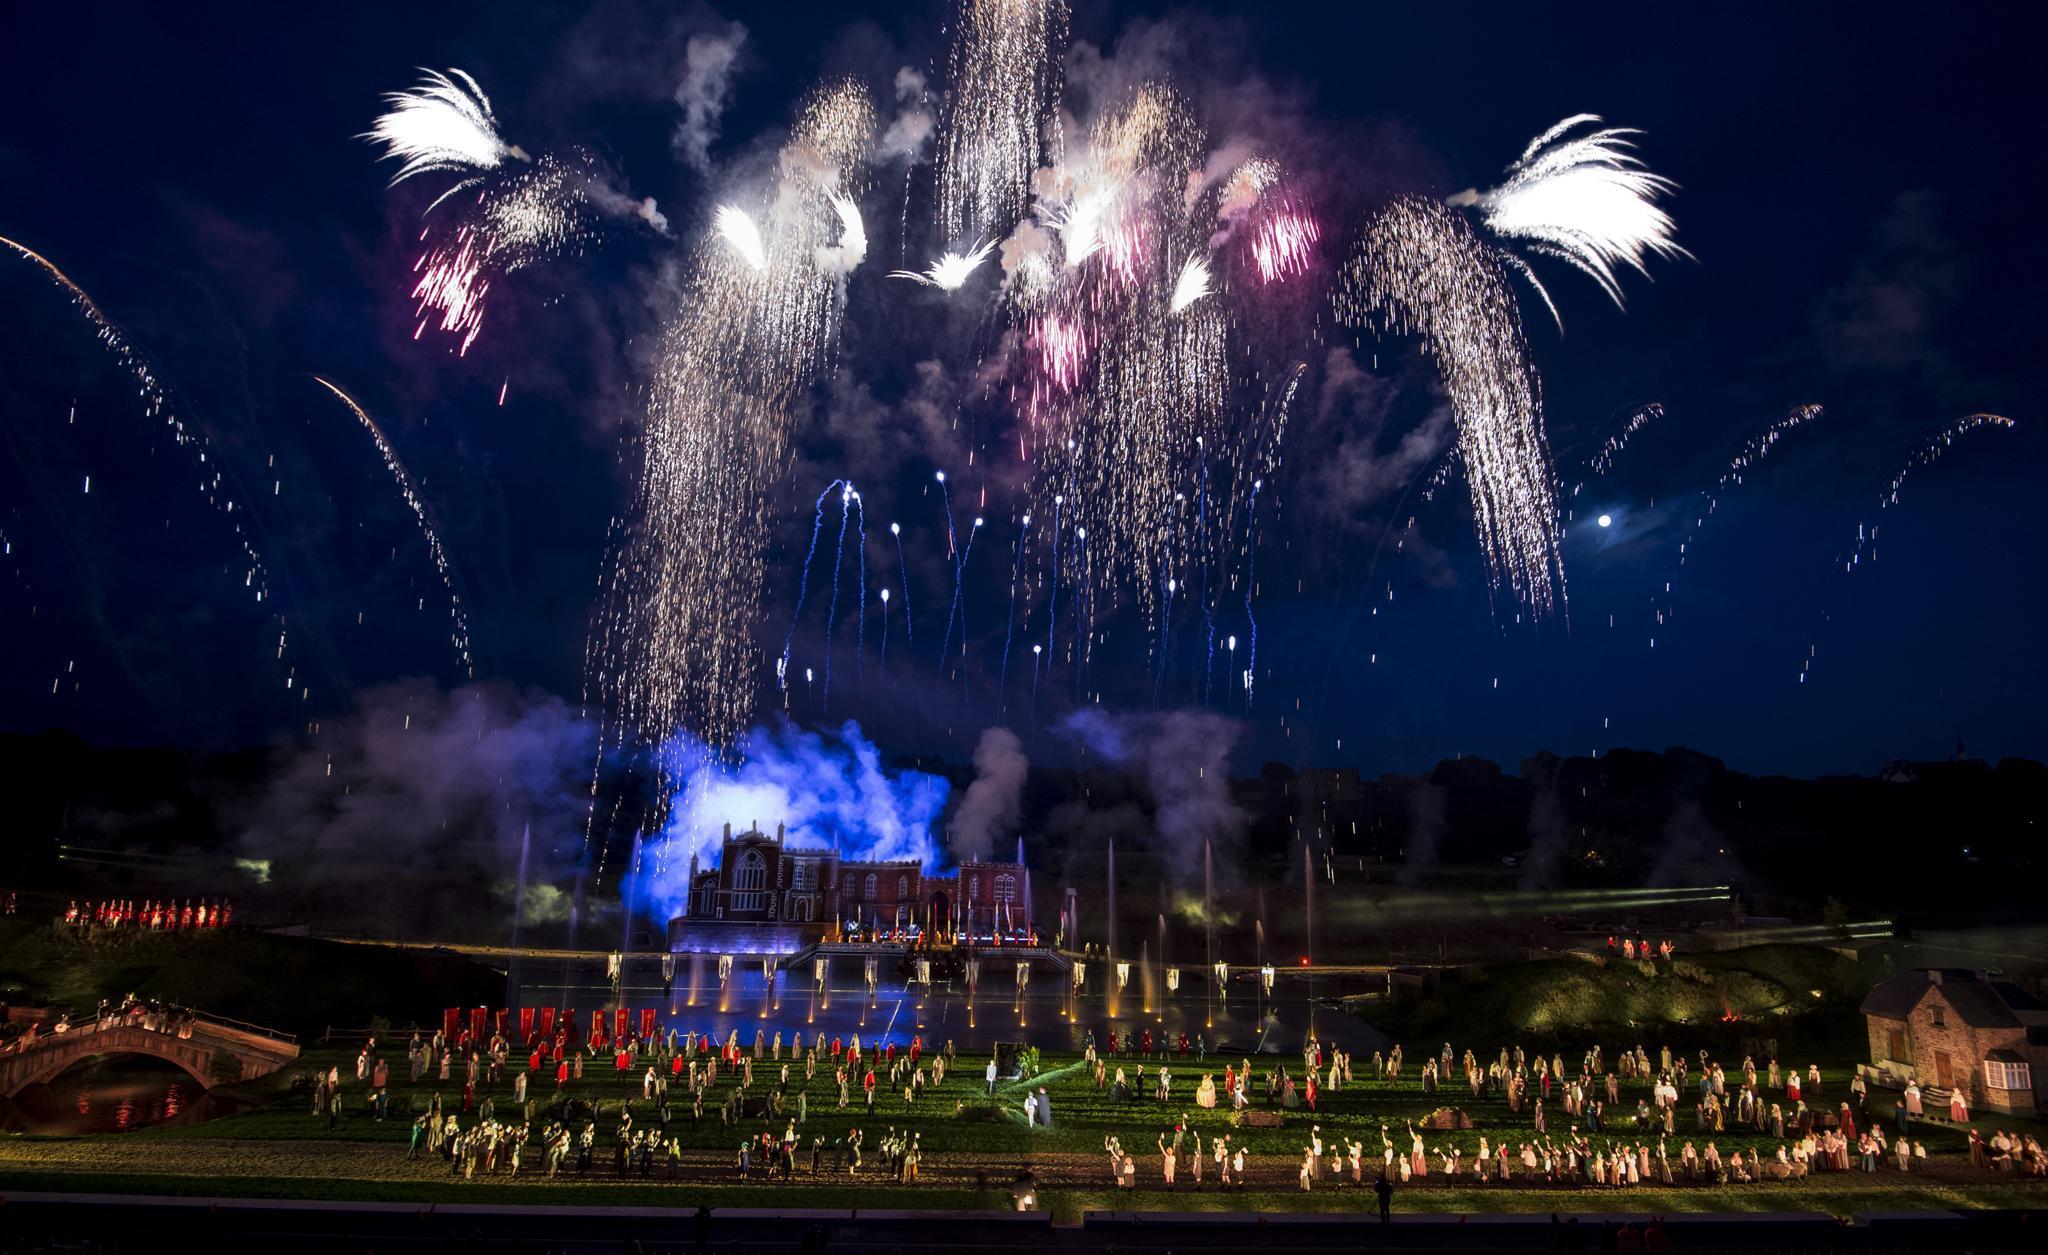 Pyrotechnics and fireworks make for a memorable show